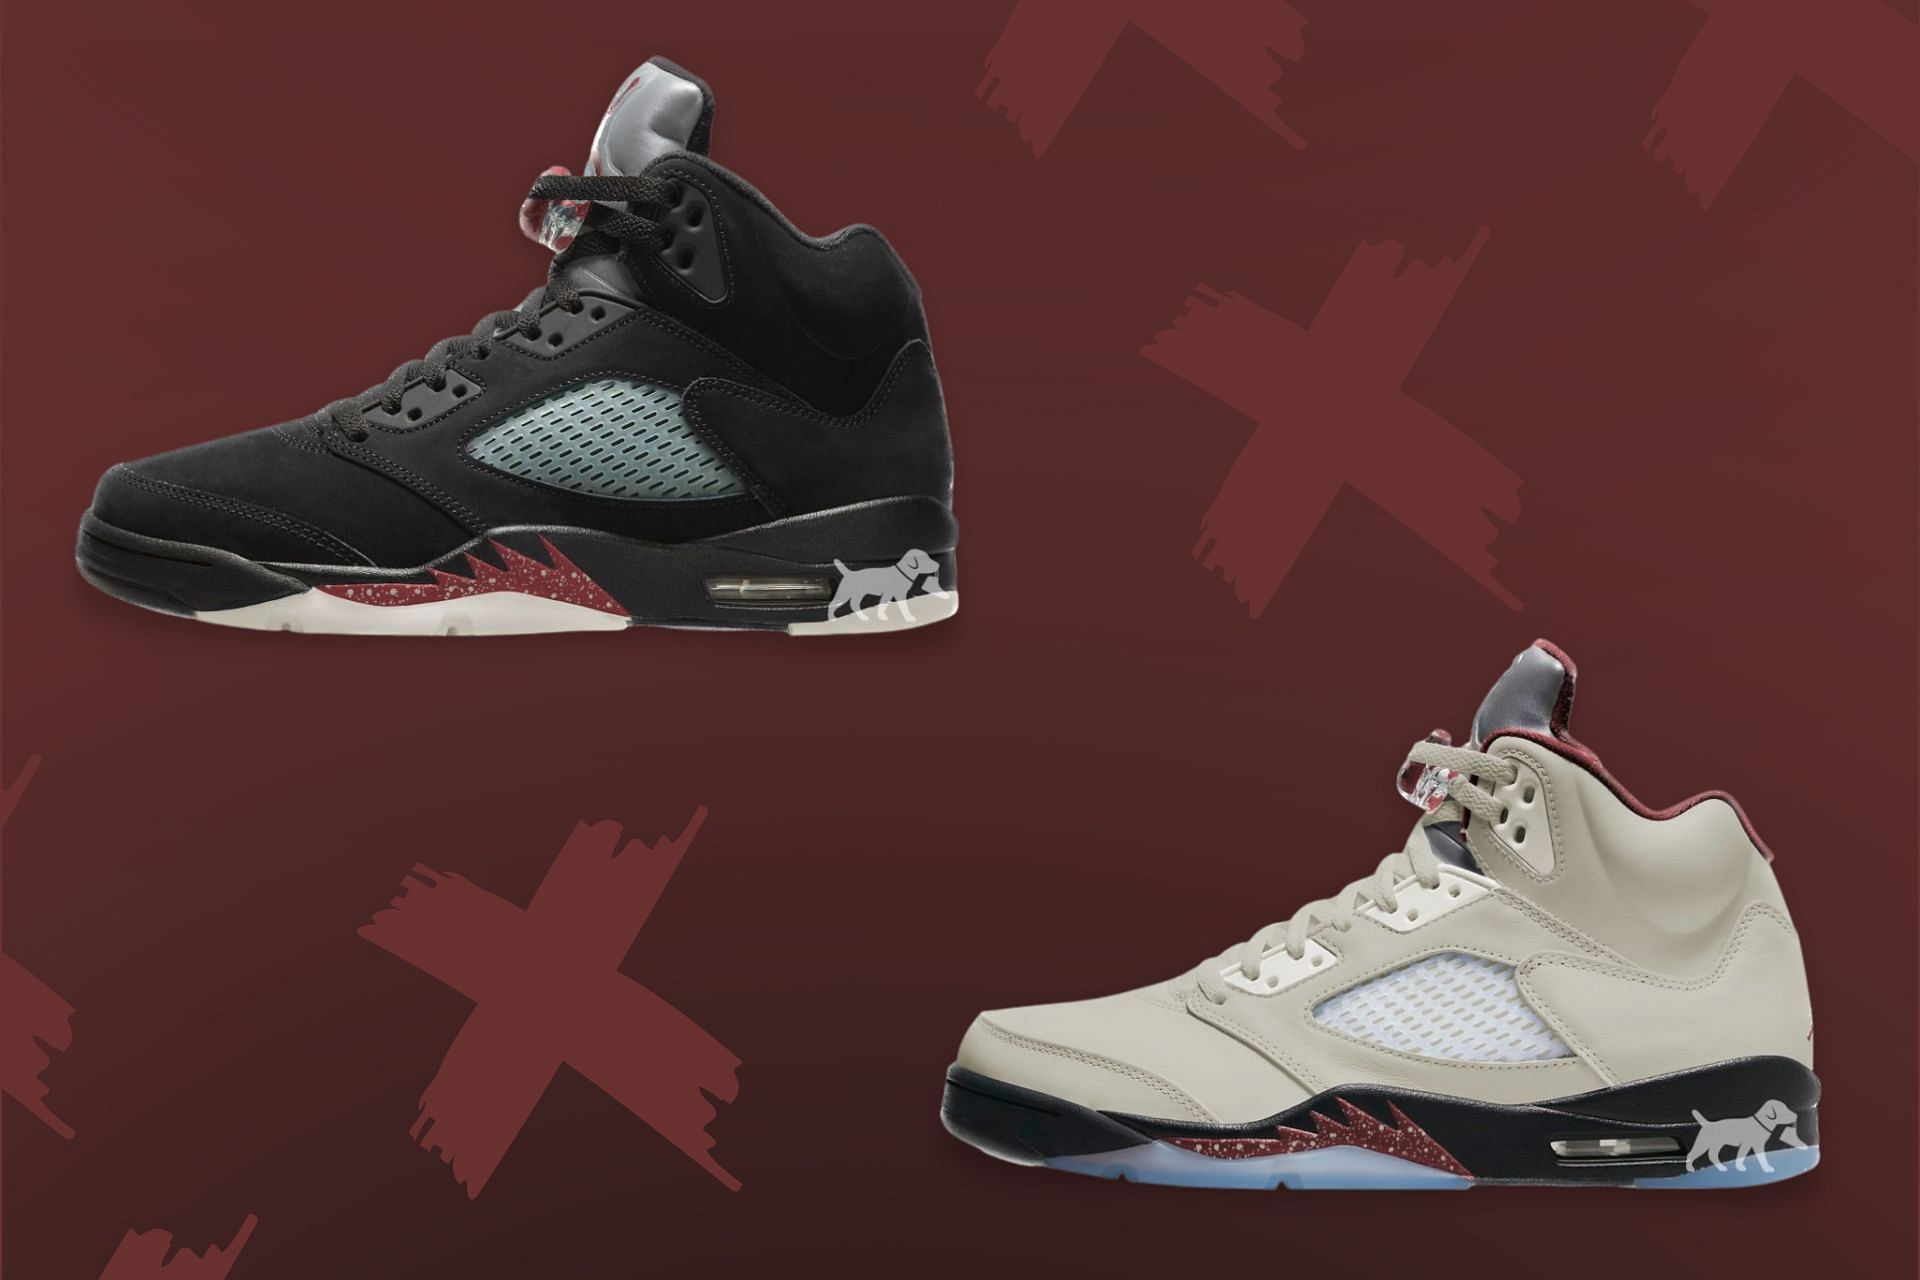 A Ma Maniere x Air Jordan 5 sneaker pack will offer two colorways (Image via Sole Retriever)